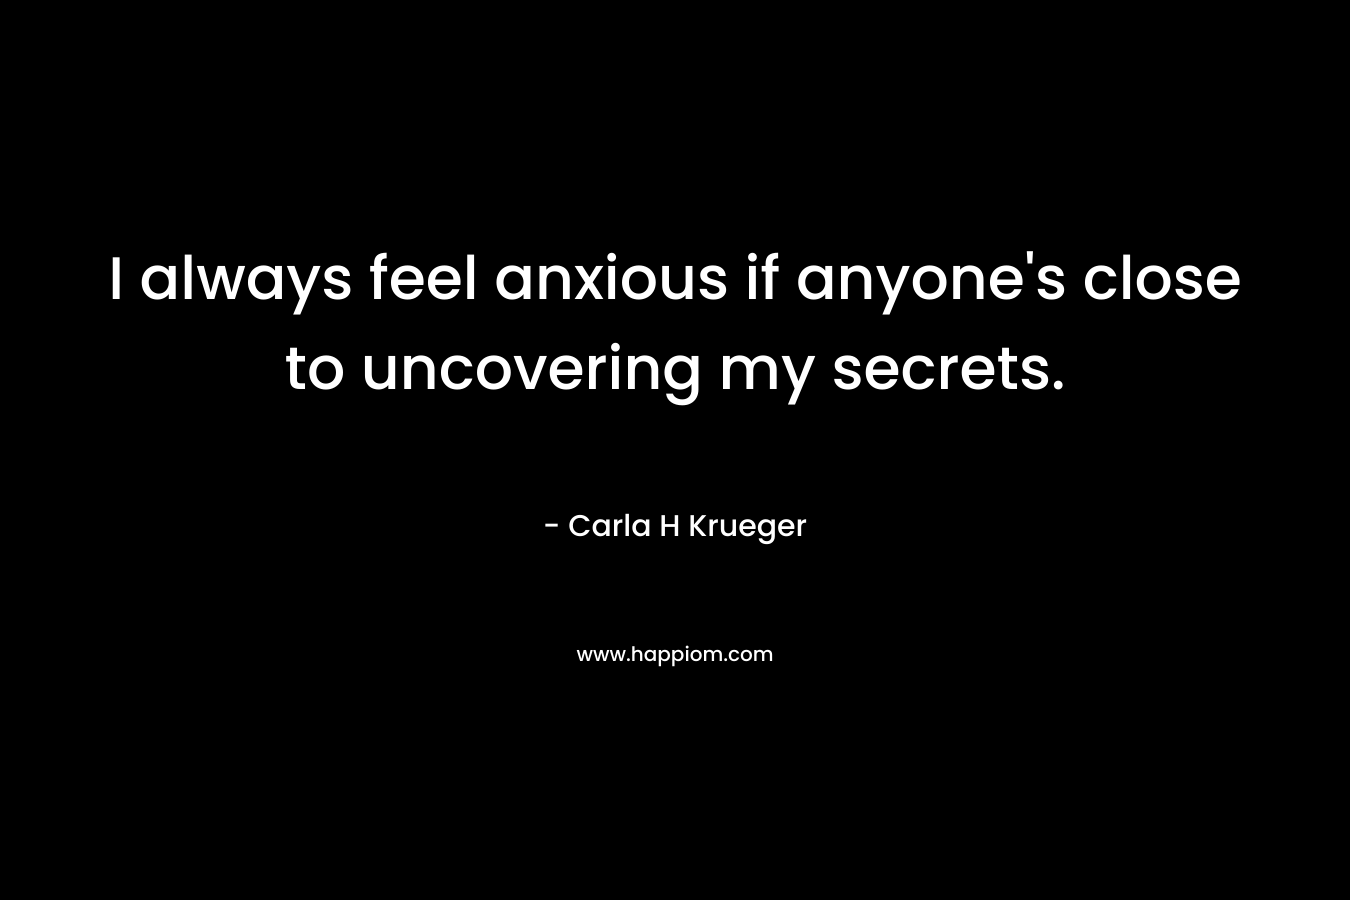 I always feel anxious if anyone’s close to uncovering my secrets. – Carla H Krueger